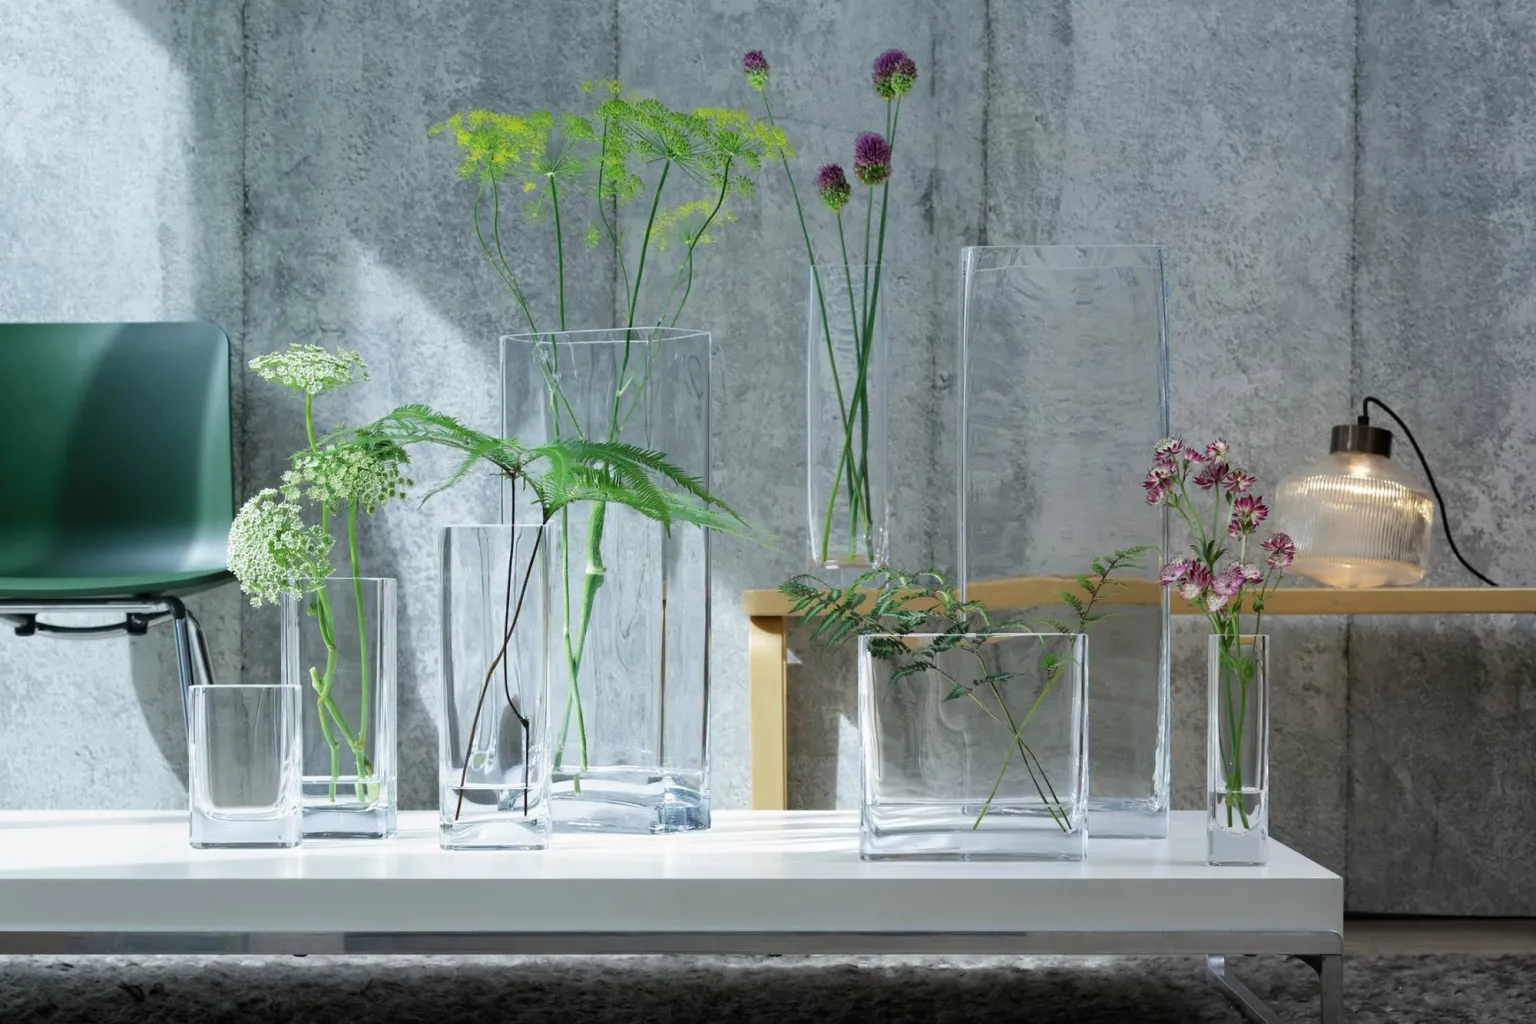 Recycled glassware that's sustainably packaged